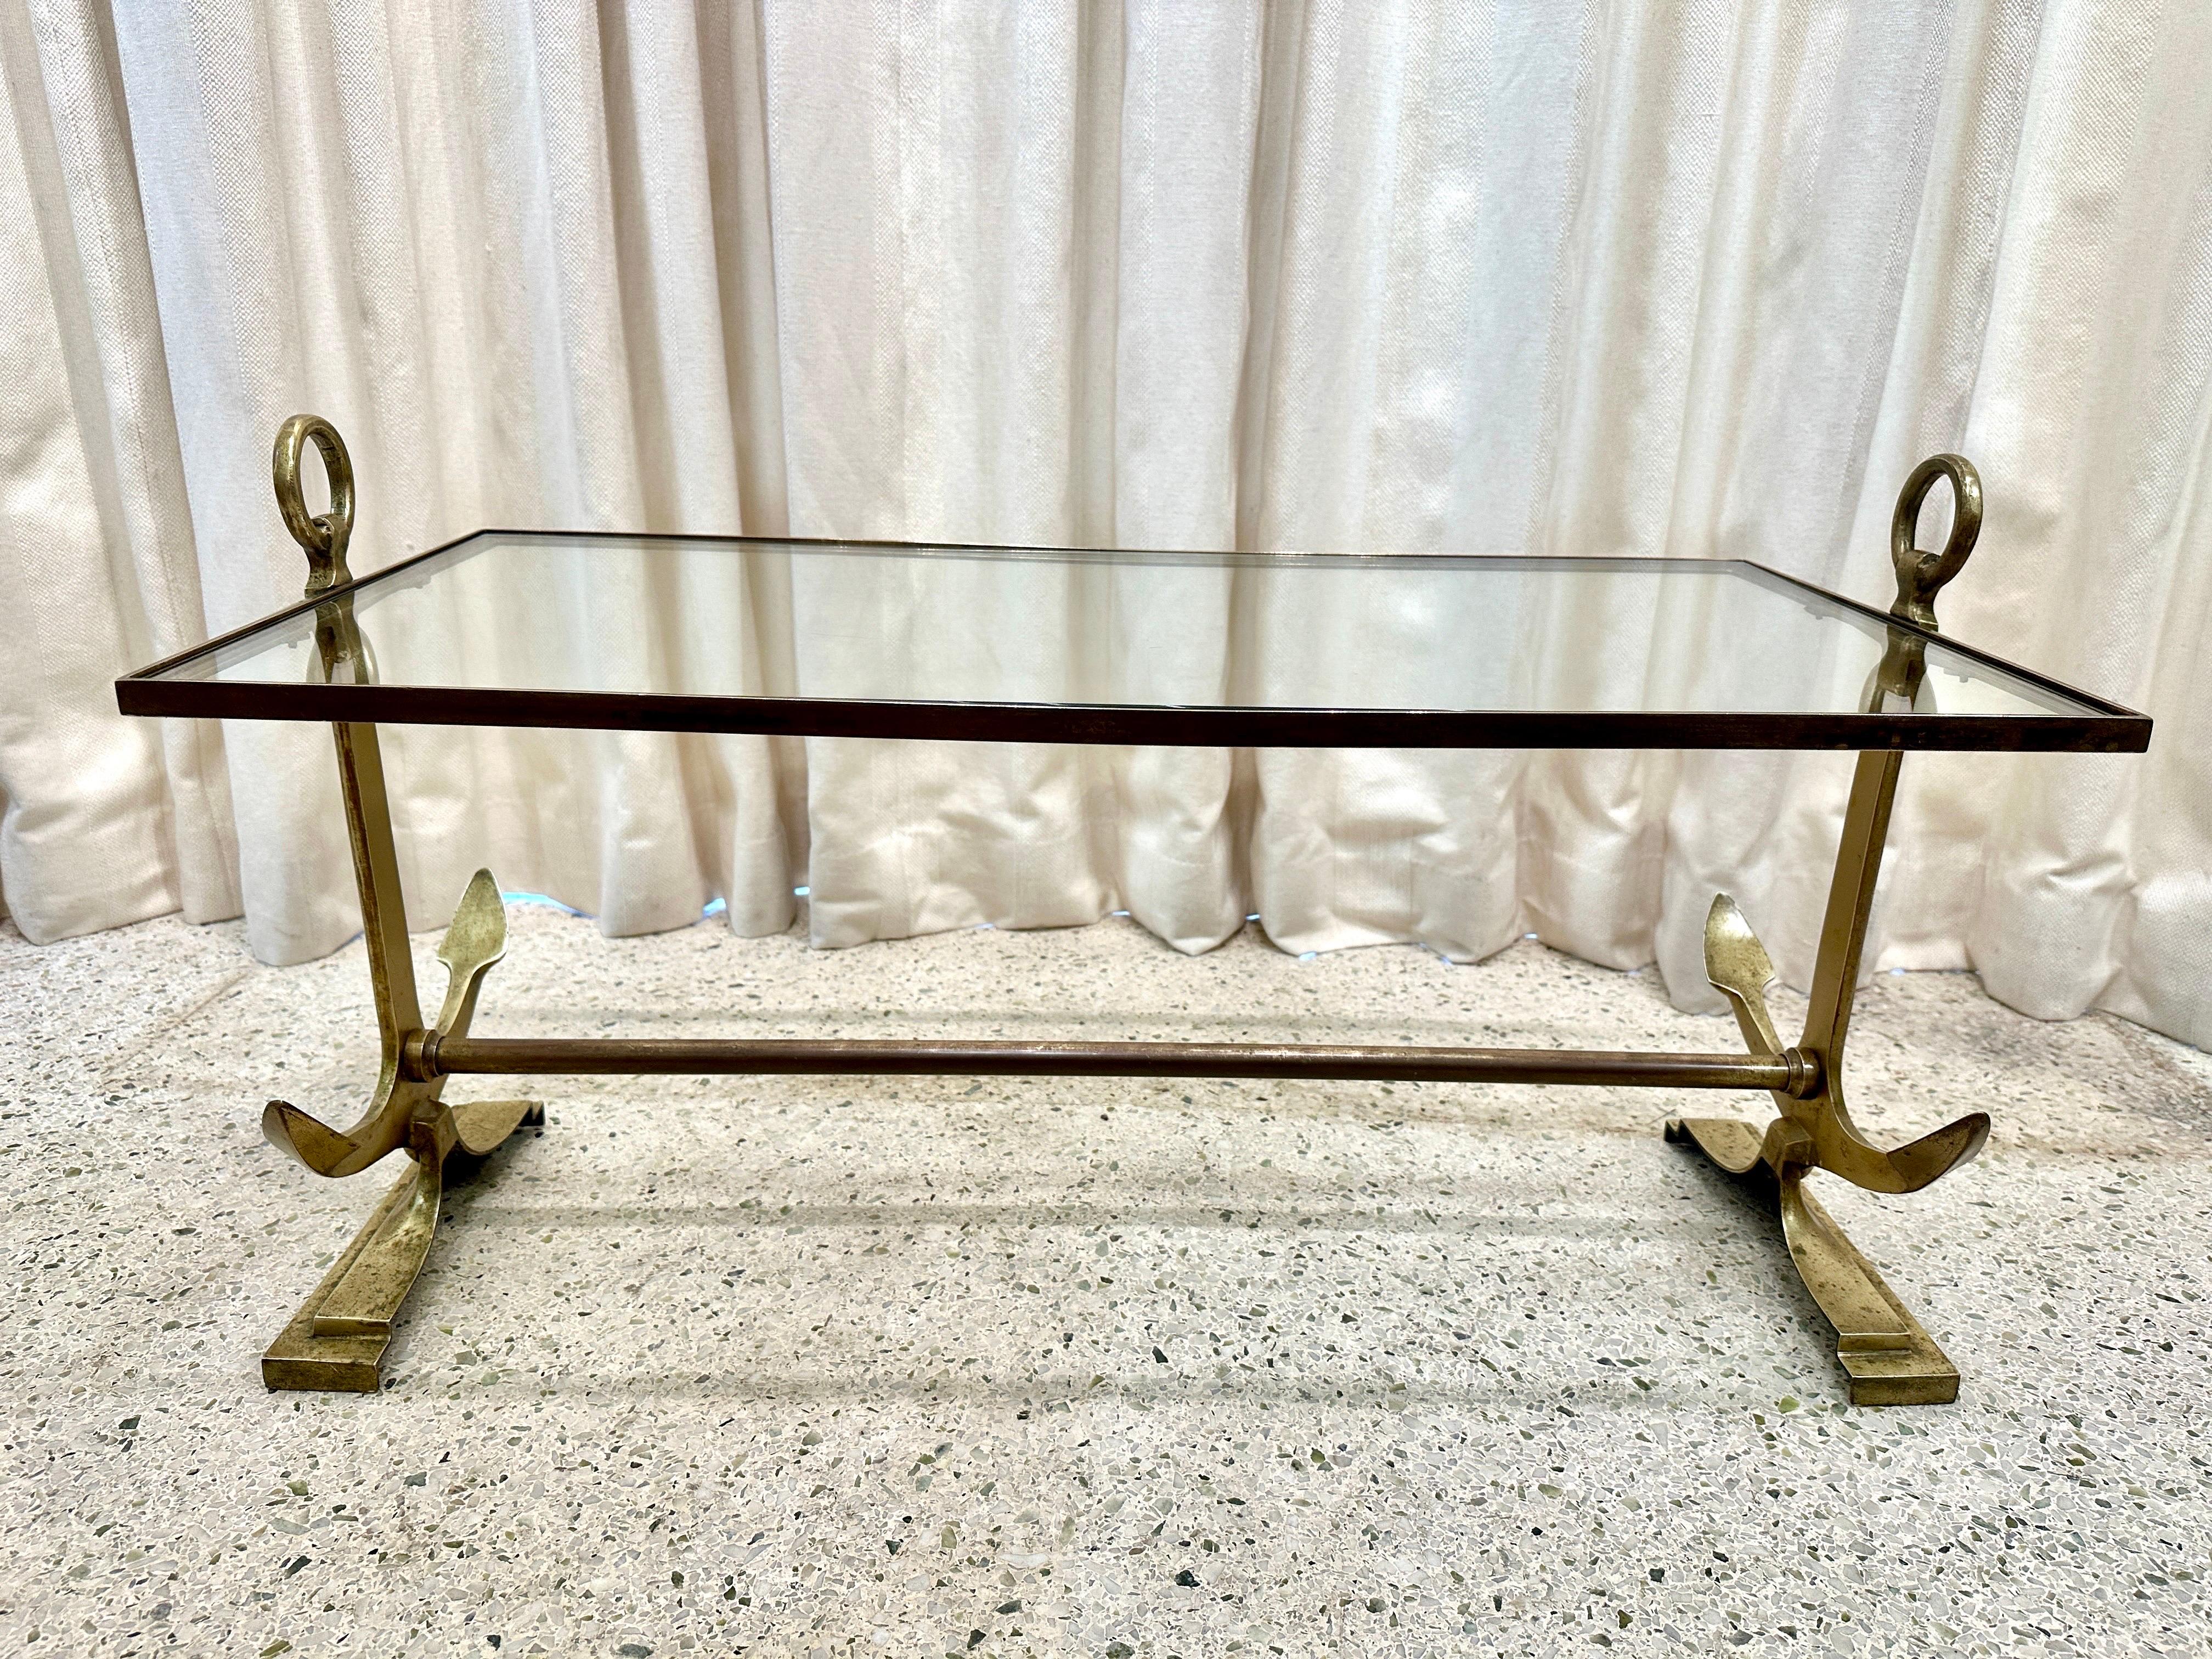 Heavy Brass & Glass Anchor Design Coffee Table, French 1960's For Sale 3